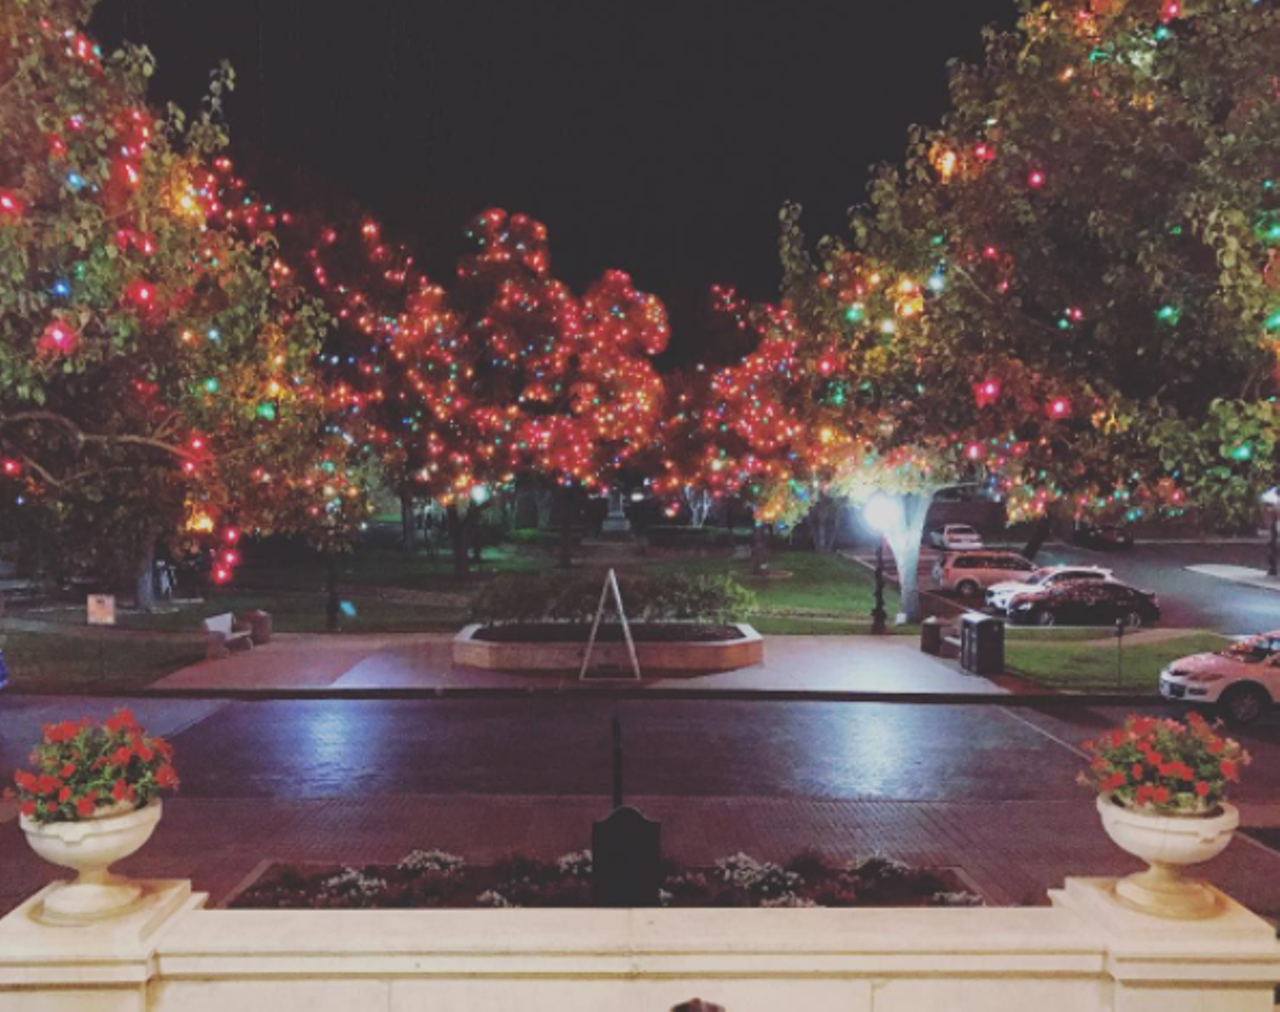 Incarnate Word
4301 Broadway St.
Walk around the college campus, which looks absolutely magical this time of year. 
Photo via Instagram,  abdulwhaab